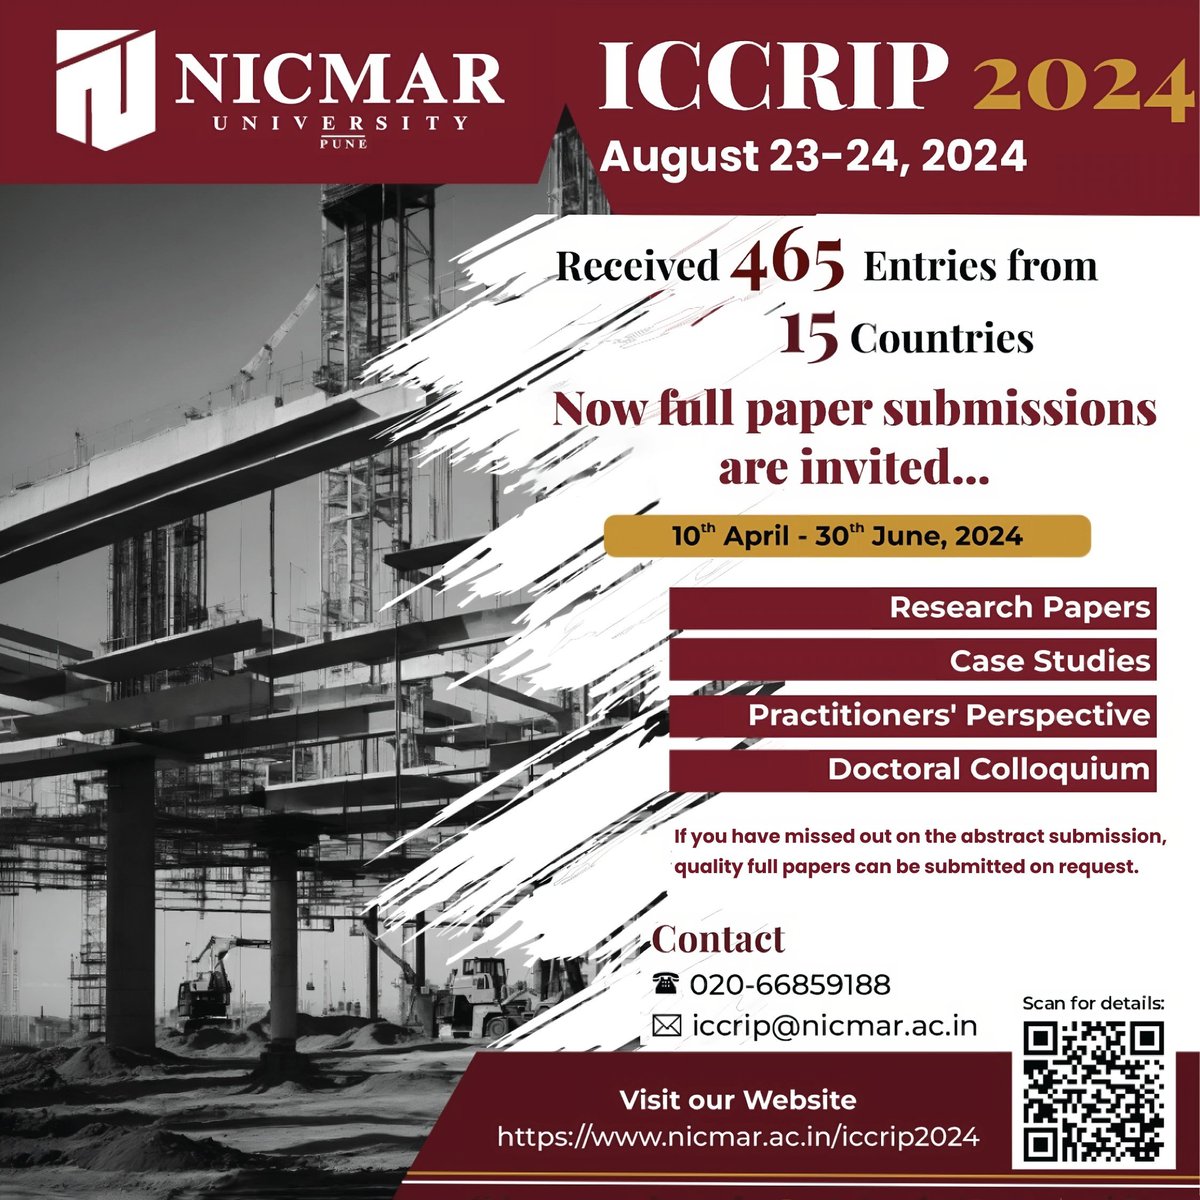 @NICMARofficial Excited to share that we've received a total of 465 entries from 15 countries for our ICCRIP-2024! If you missed the initial submission deadline, don't worry - you can now submit a full paper on request. #NICMARUniversity #CallForPapers #Research